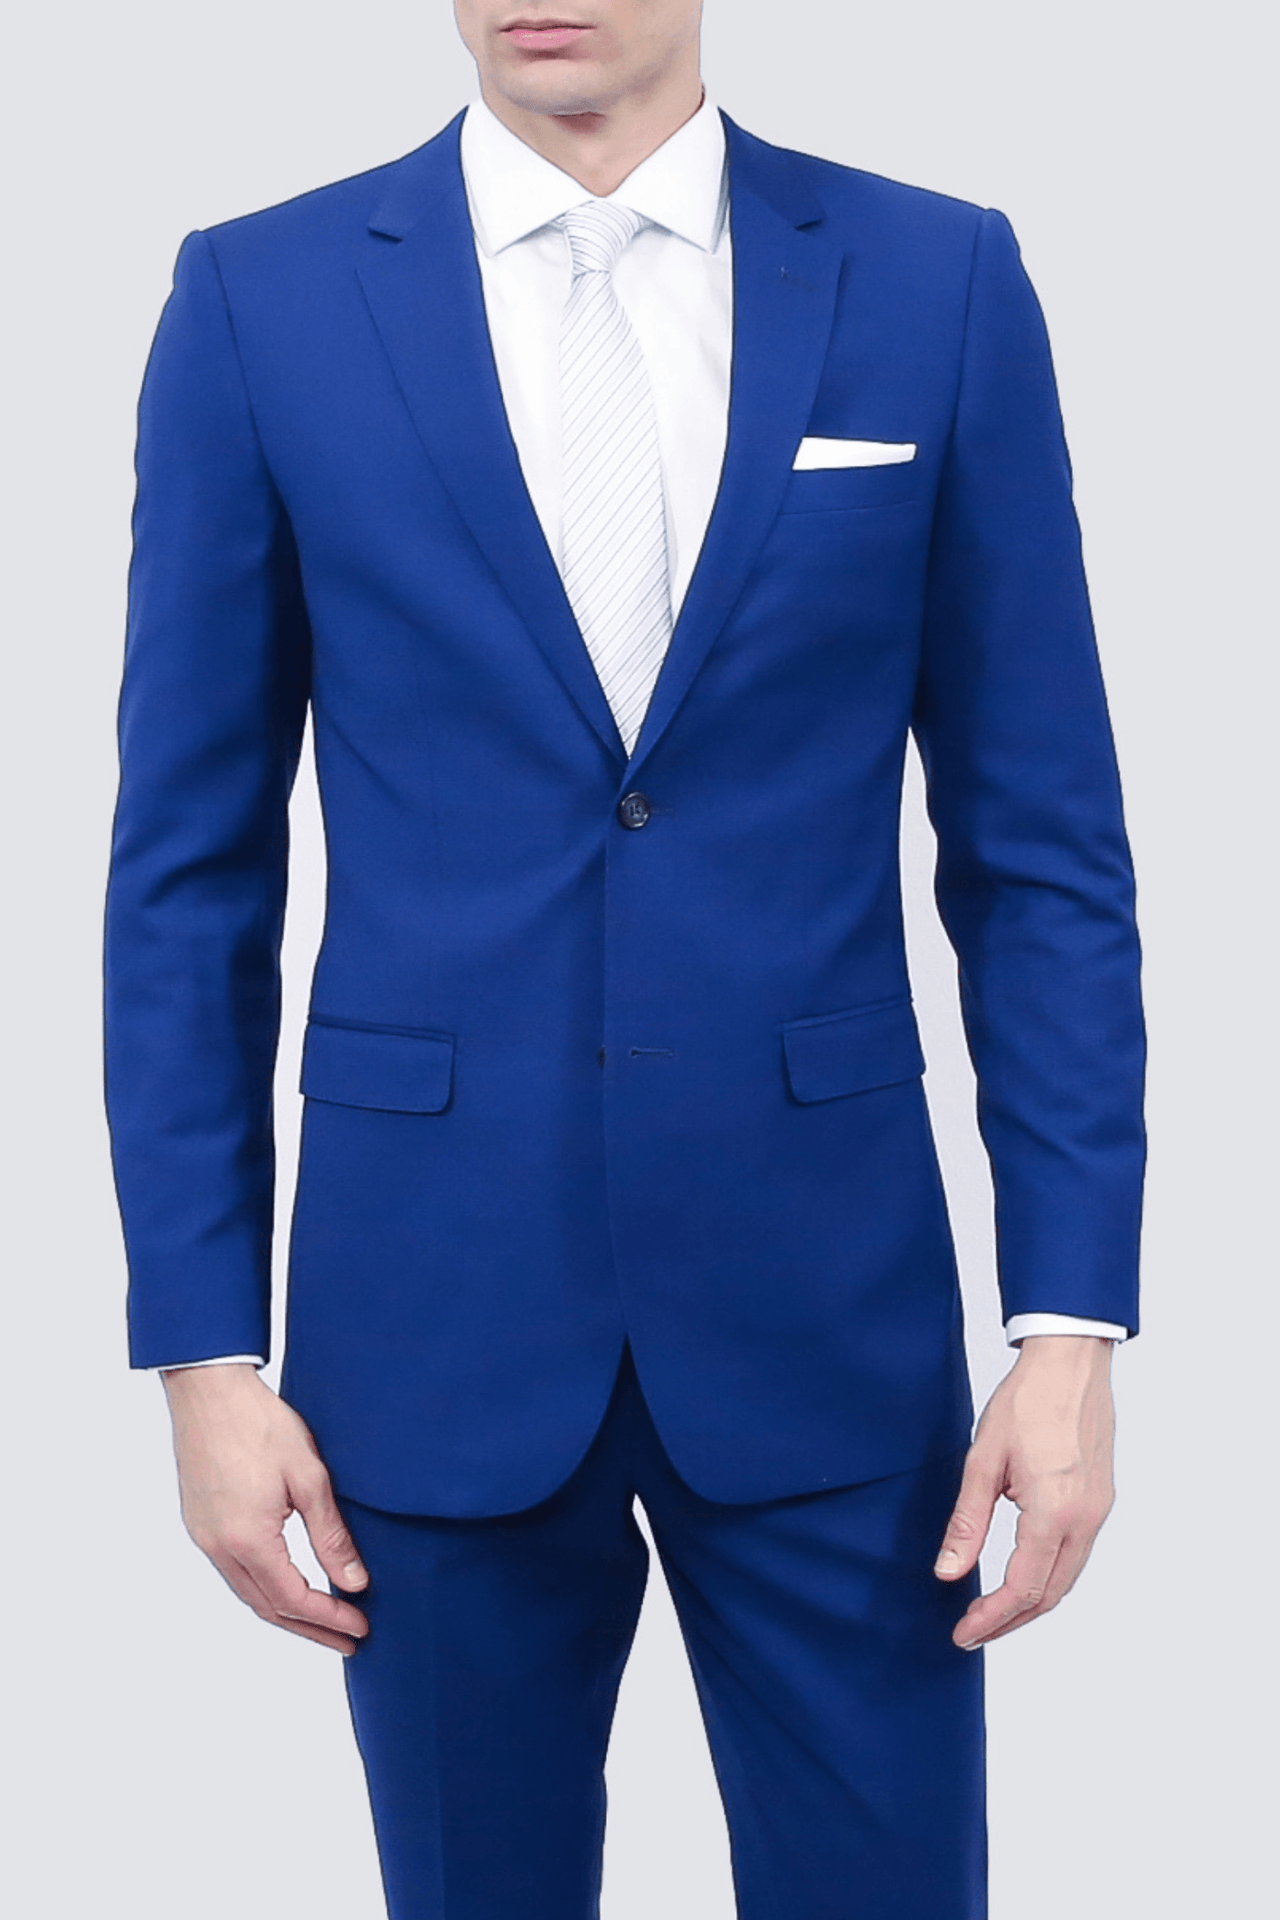 Everything You Need To Know About The Navy Blue Suit | Blue suit black tie, Blue  suit black shoes, Blue suit men